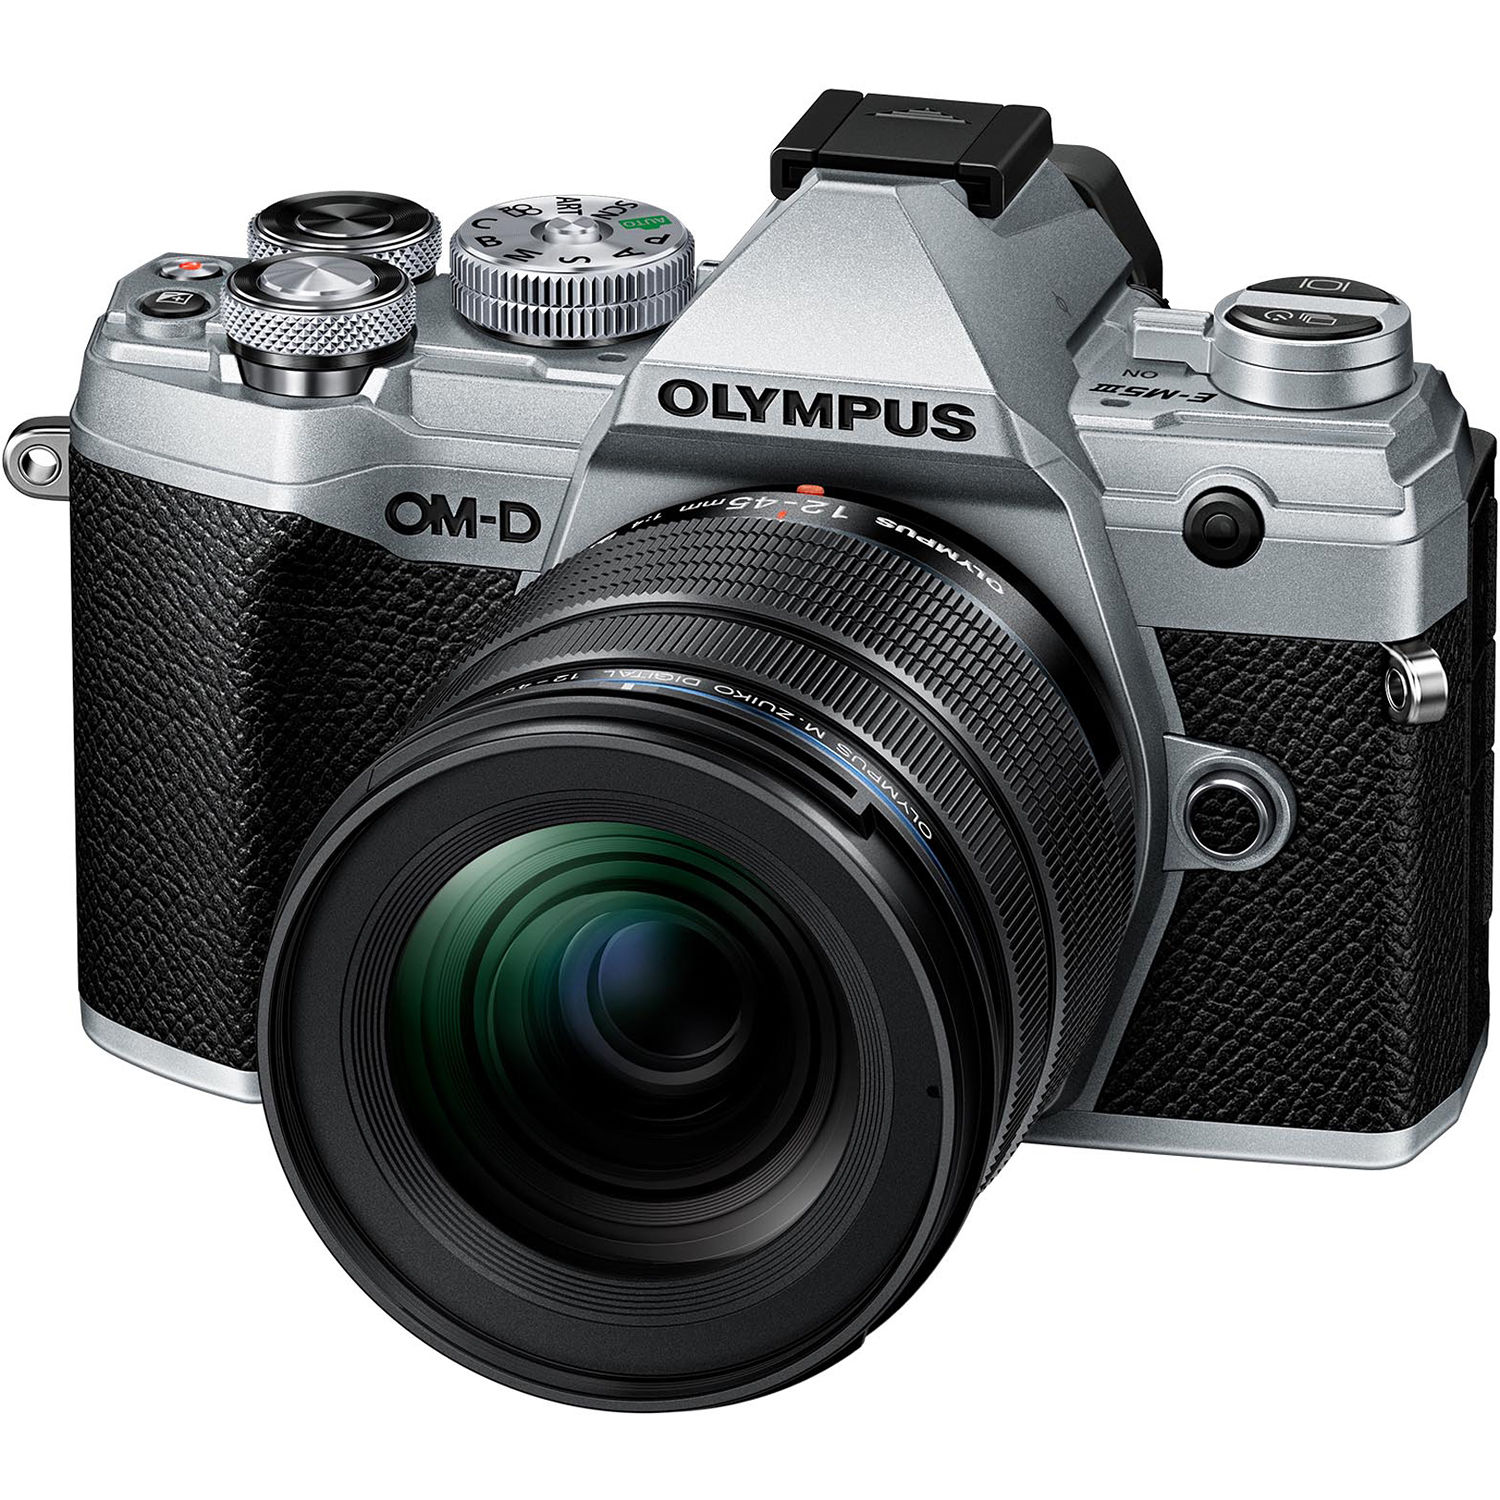 Olympus OM-D E-M5 Mark III Silver Body with 12-45mm F4.0 PRO Lens Kit